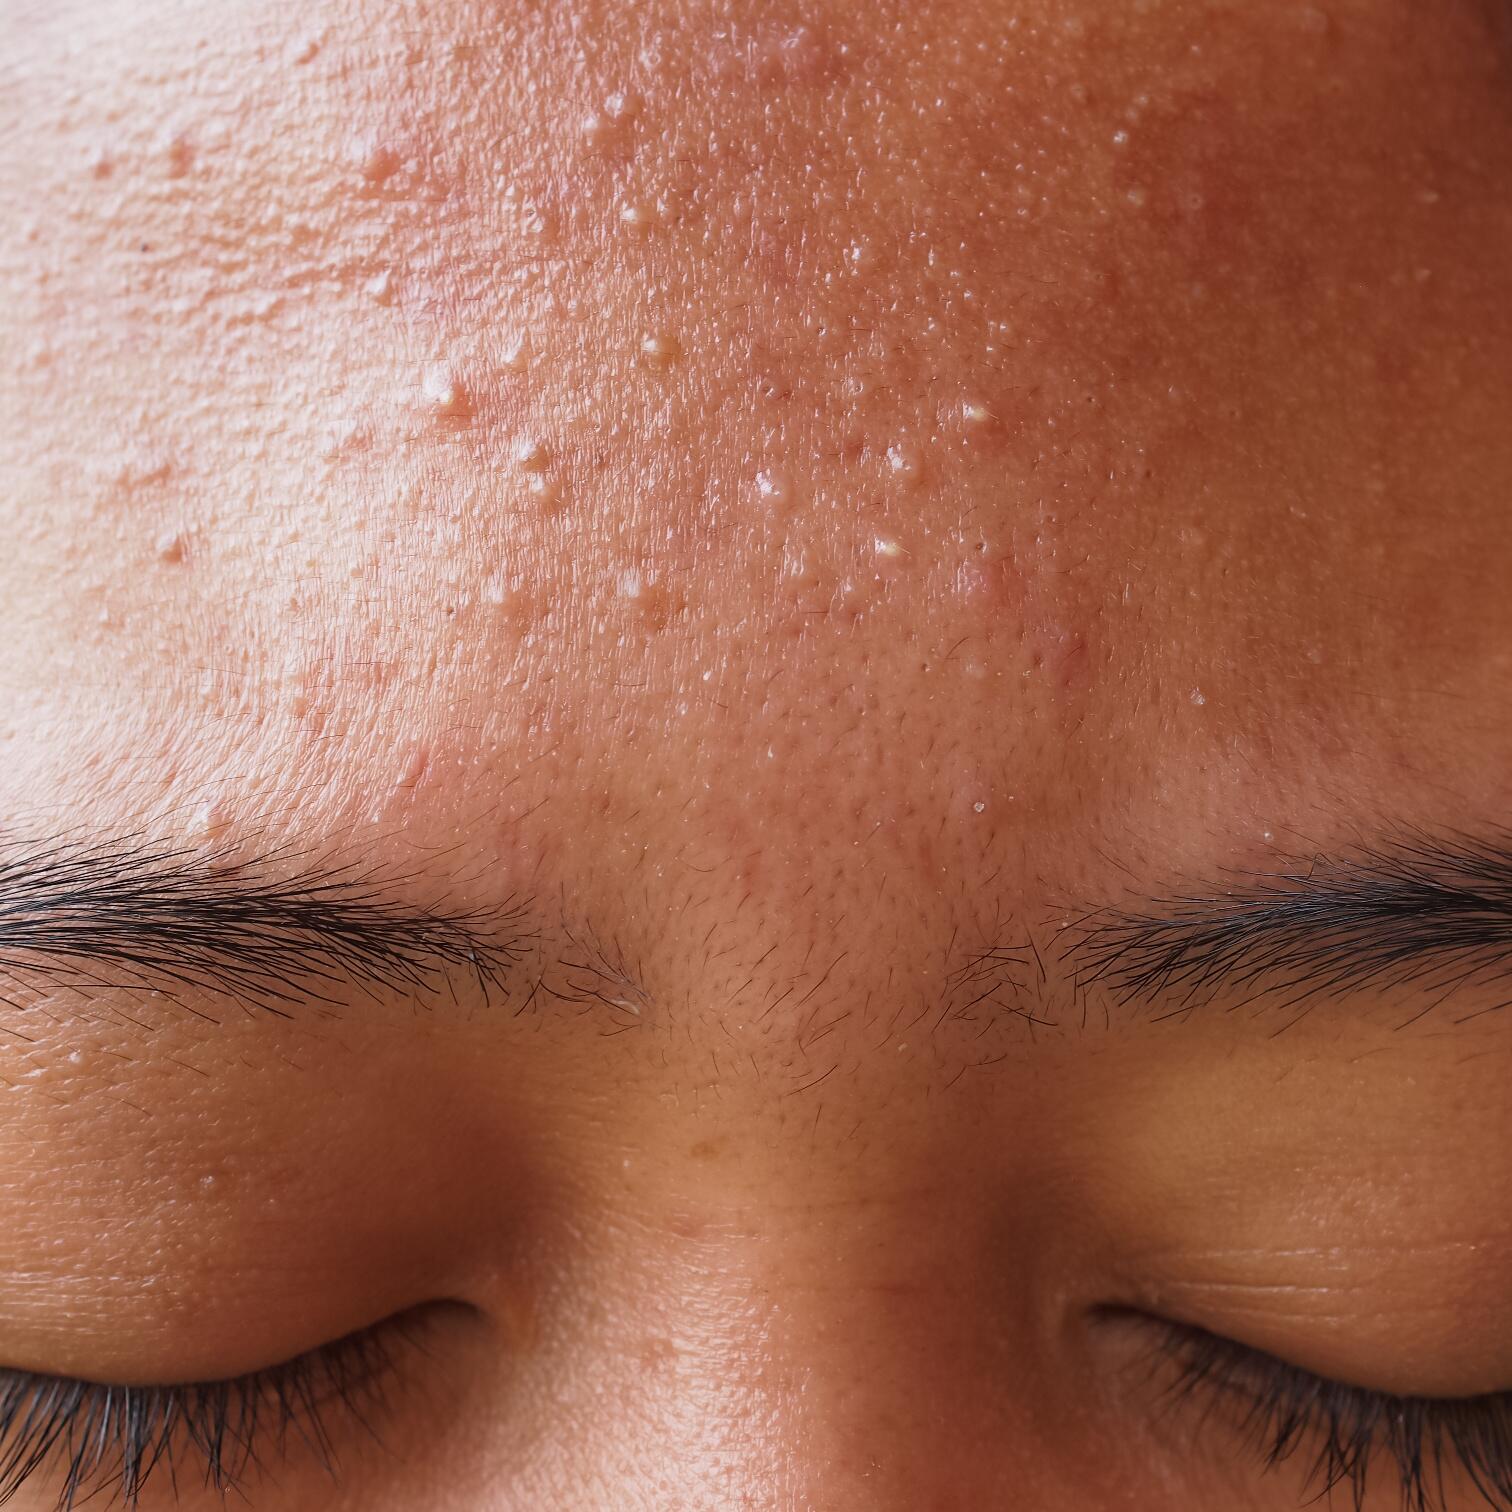 AD_ACNE_NOSE-MICROKYSTE-PIMPLE_SQUARE_2021 472x472